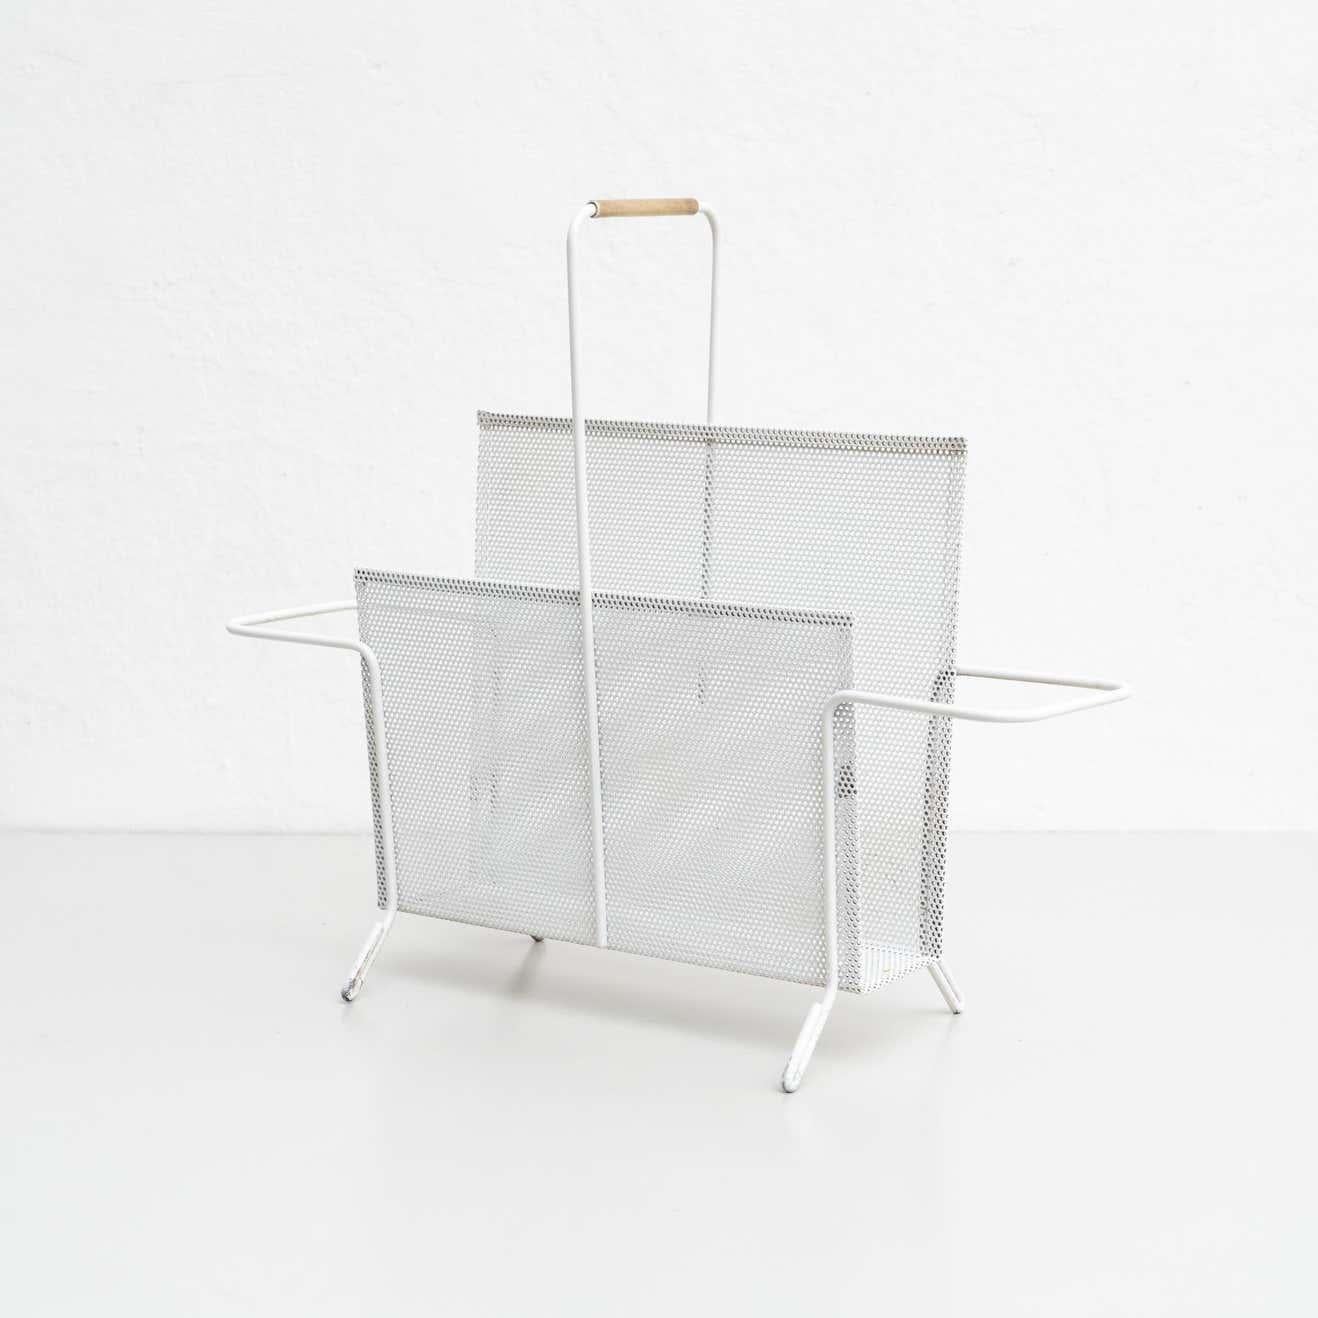 Mathieu Matégot White Lacquered Metal Magazine Holder, circa 1950 In Good Condition For Sale In Barcelona, Barcelona